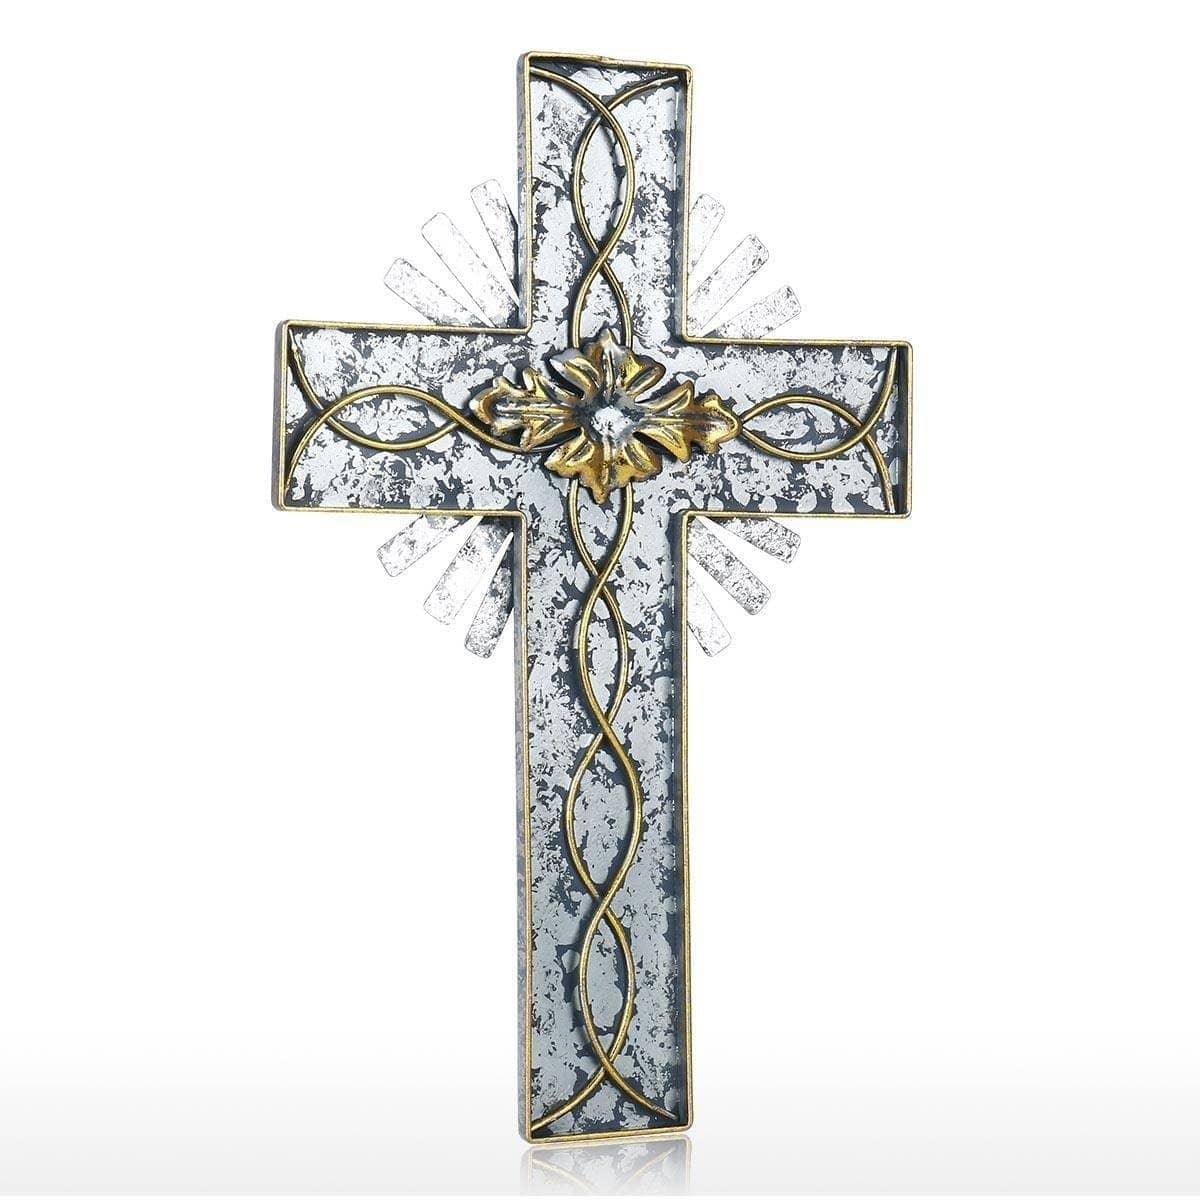 Holy Glow Cross Decor: Spiritual and Stylish Wall Art for Religious Homes